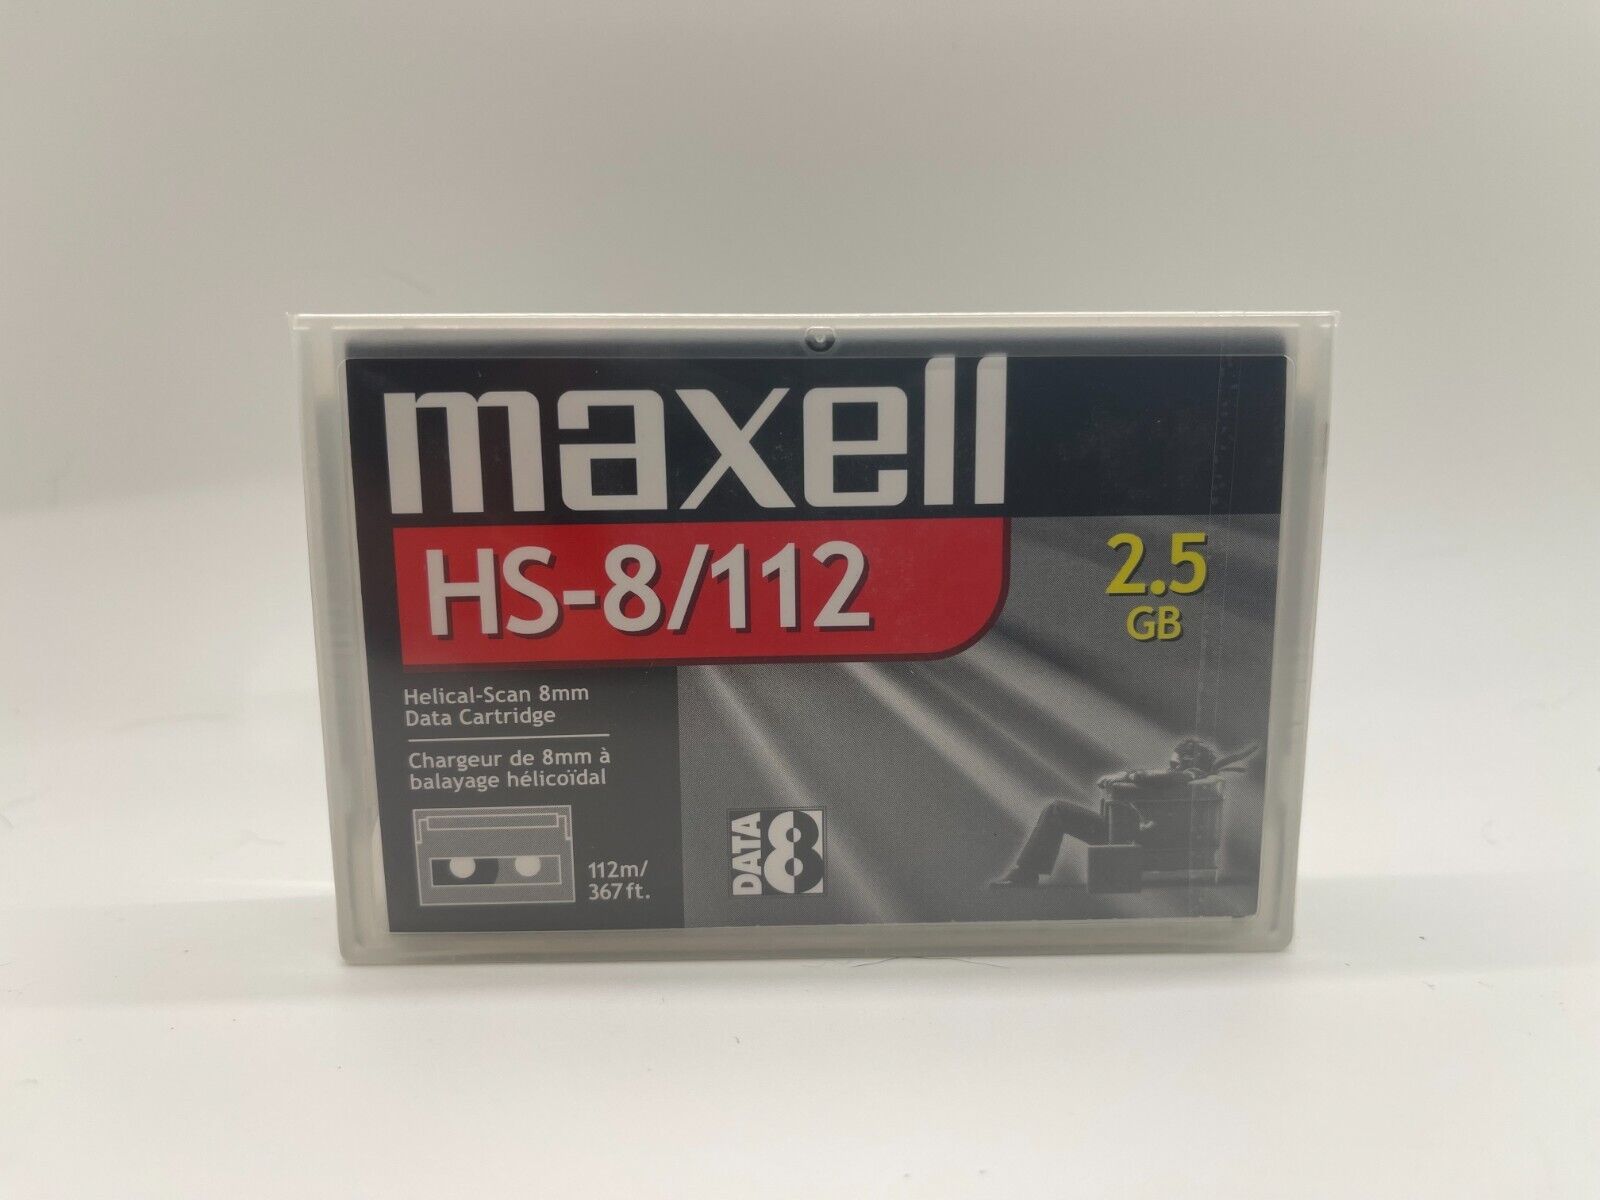 NOS 10 PACK SEALED Maxell HS-8/112 Helical Scan 8mm Data Cartridges 2.5 GB